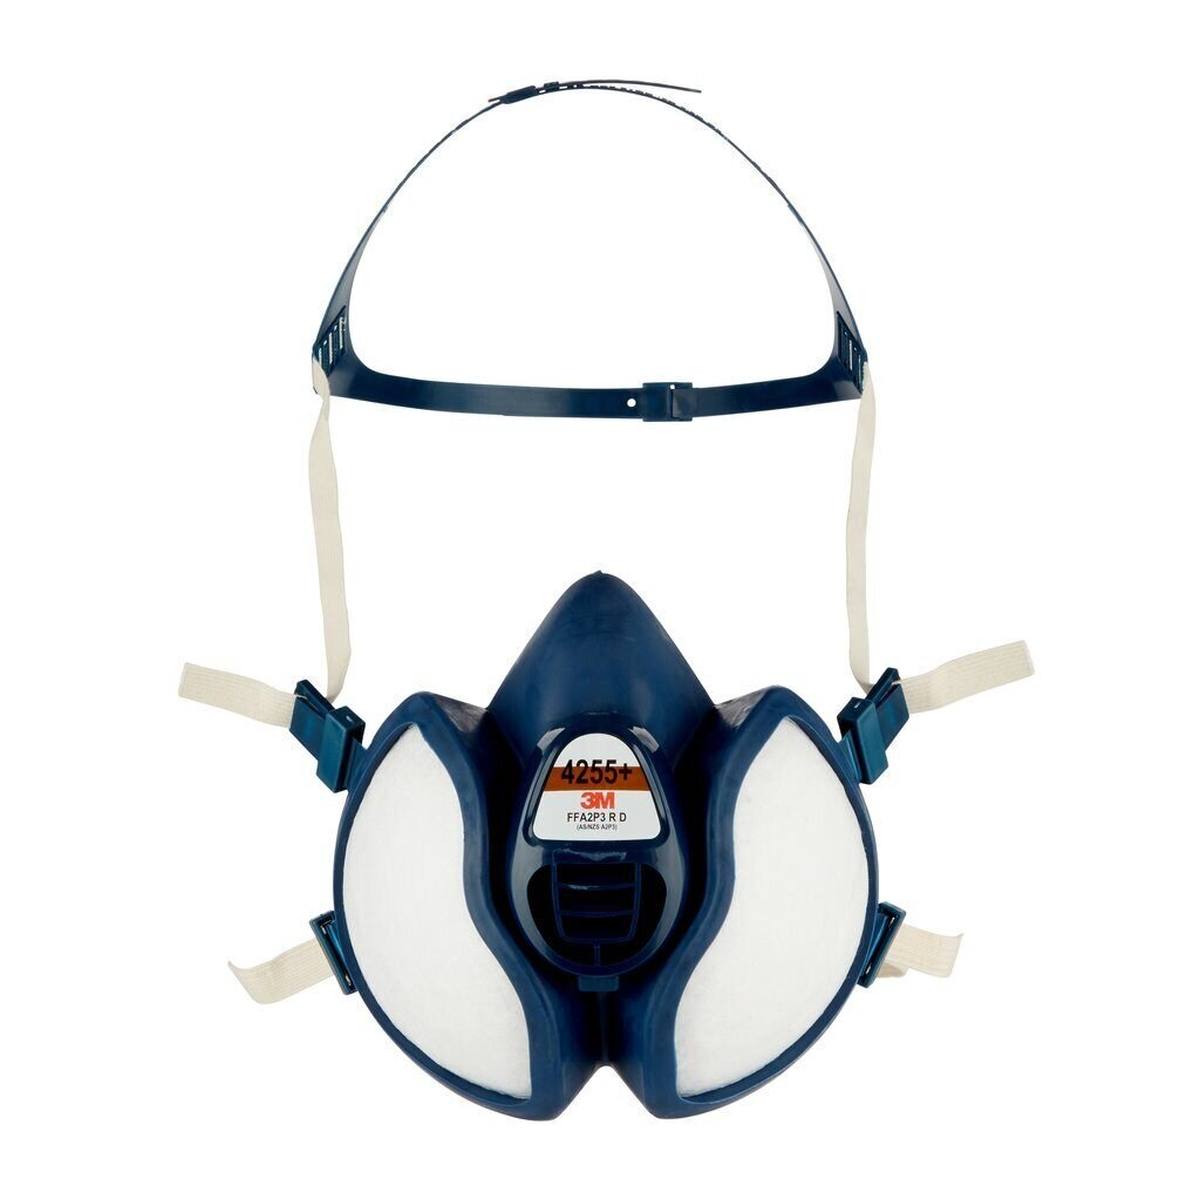 3M 4279+ respirator FFABEK1P3RD against organic and inorganic gases and vapors, acid gases as well as ammonia and particles up to 30 times the limit value